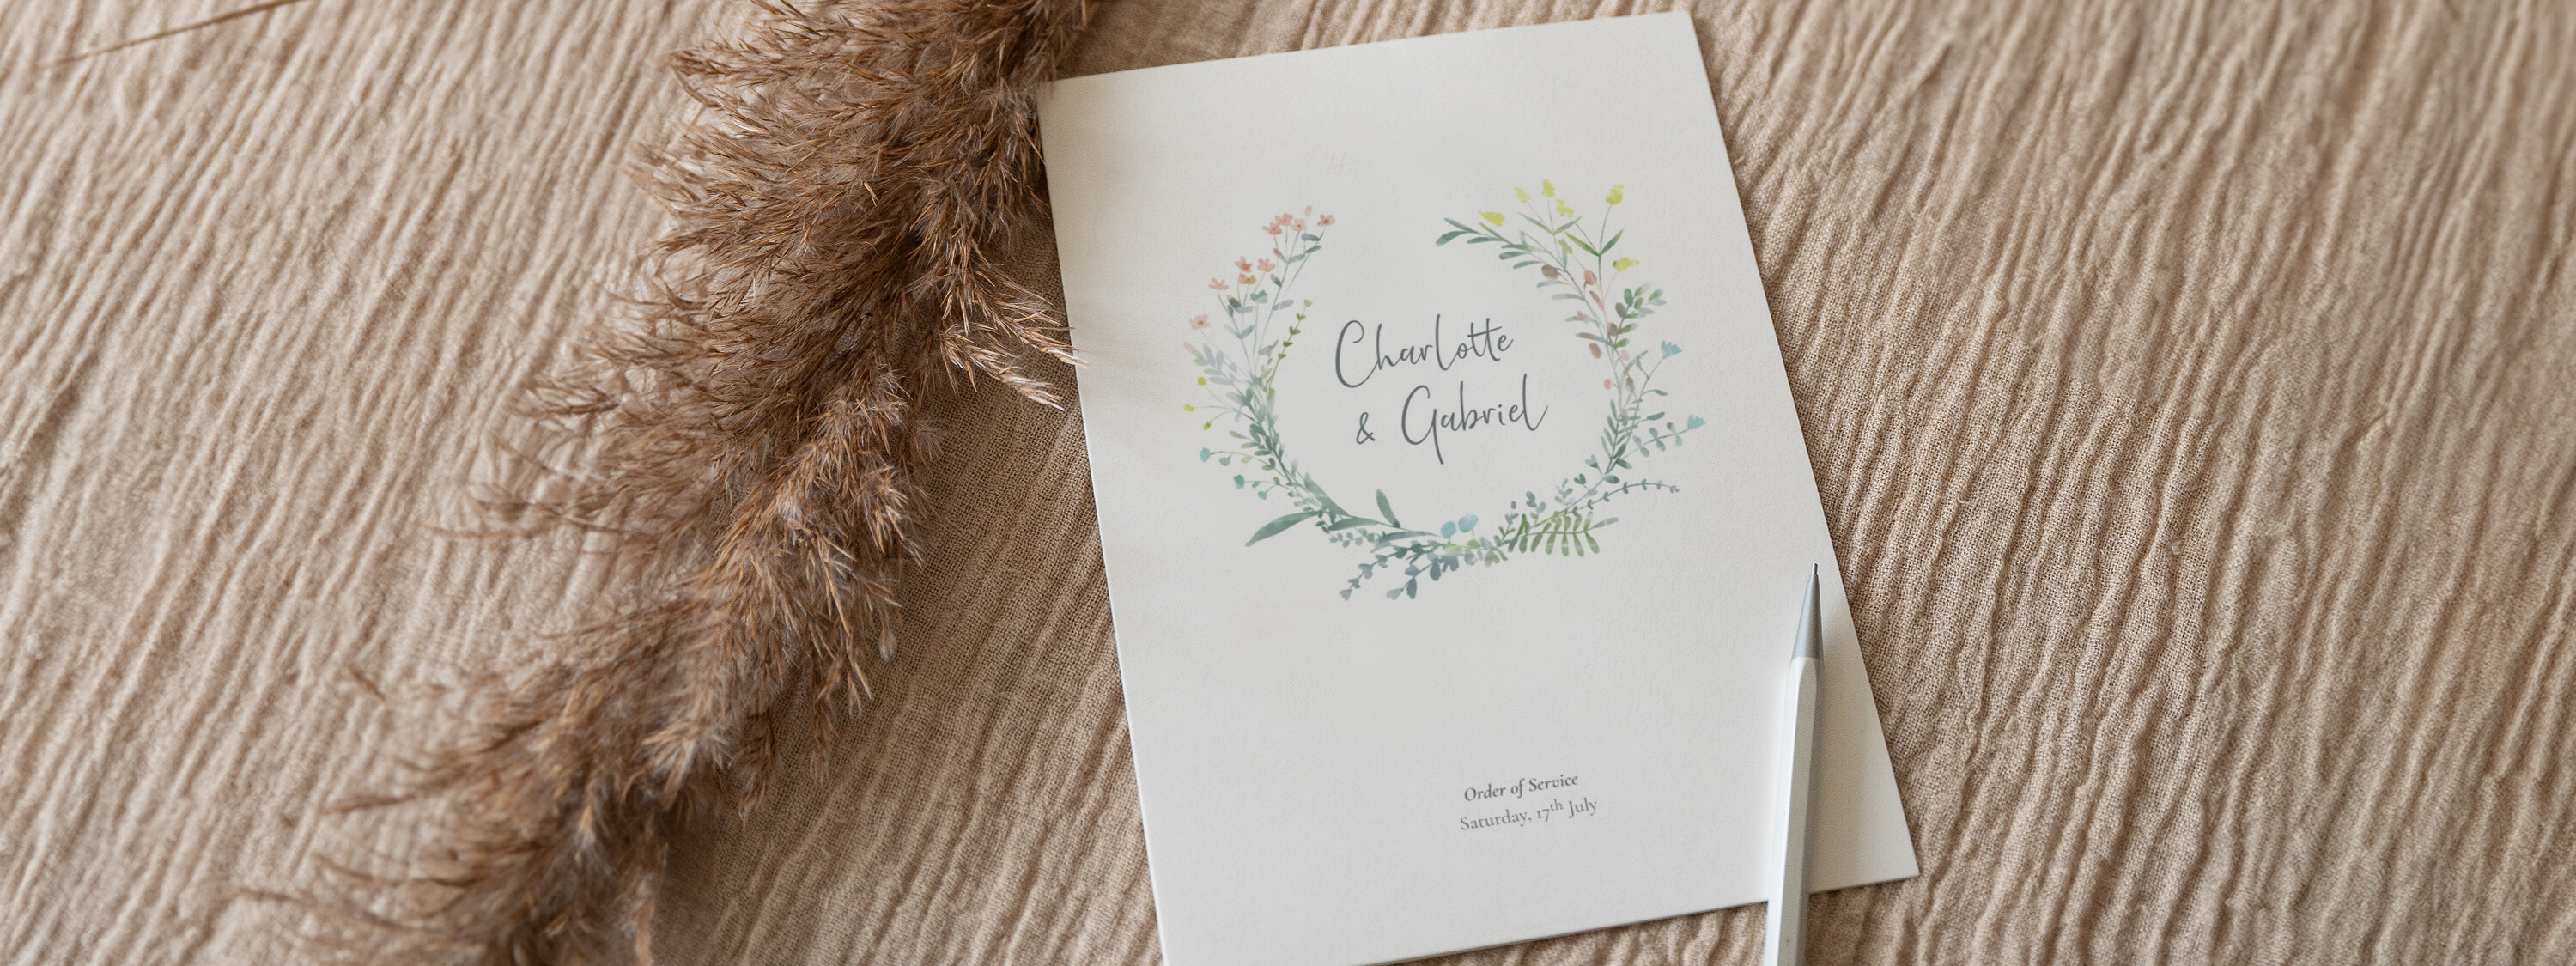 Classic Wedding Order of Service Booklet Covers